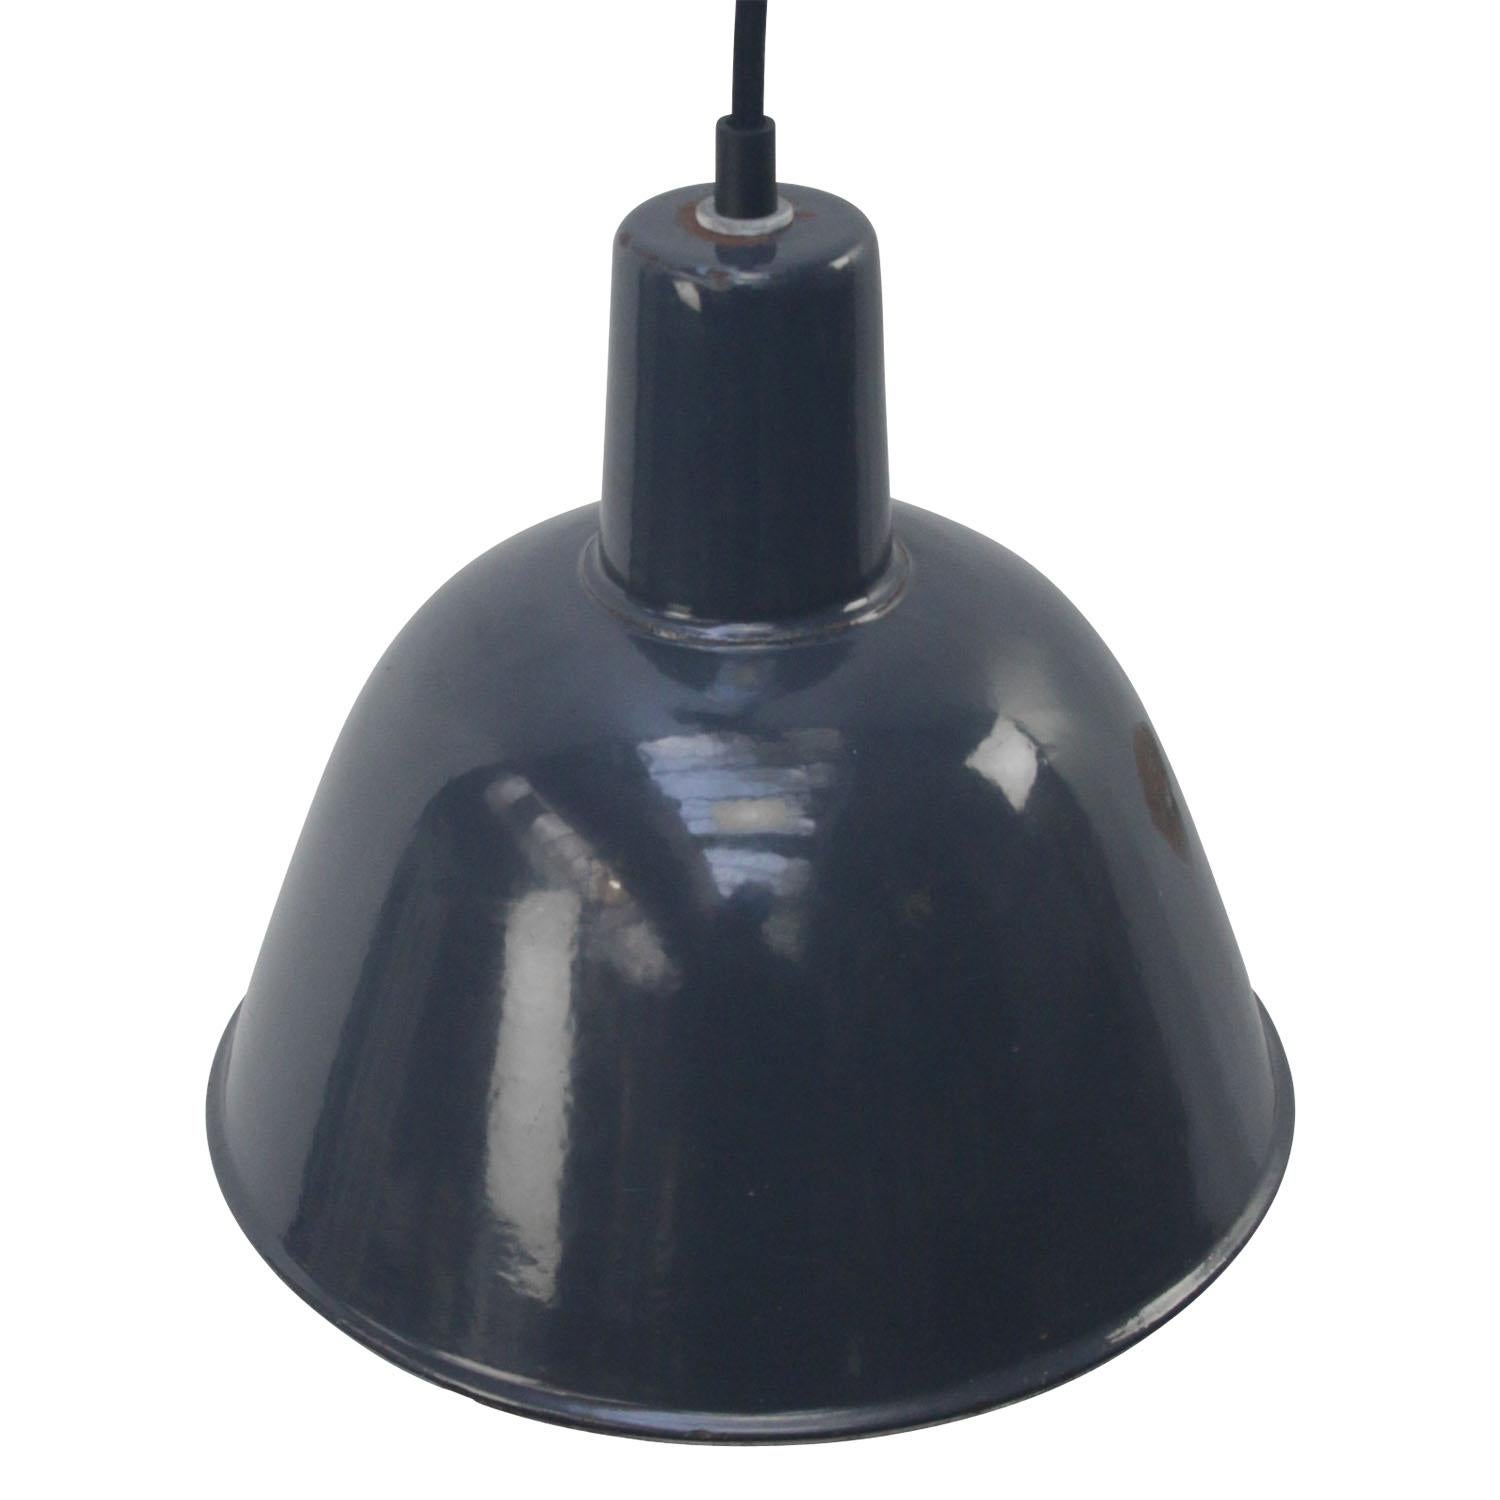 Small pendant Industrial
blue enamel
white interior

Weight: 1.50 kg / 3.3 lb

Priced per individual item. All lamps have been made suitable by international standards for incandescent light bulbs, energy-efficient and LED bulbs. E26/E27 bulb